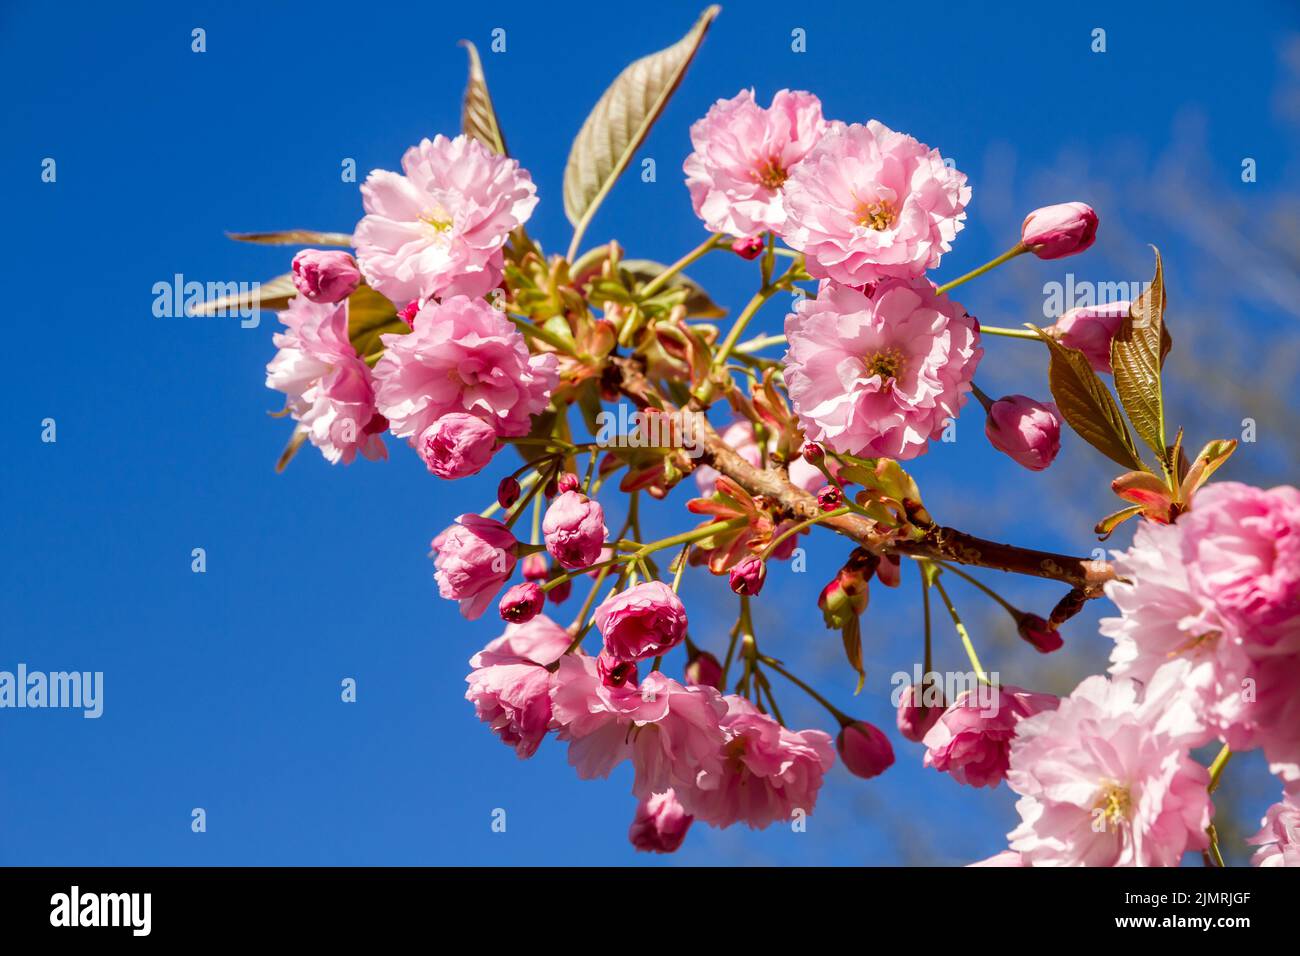 Japanese cherry blossom in spring. Closeup view Stock Photo